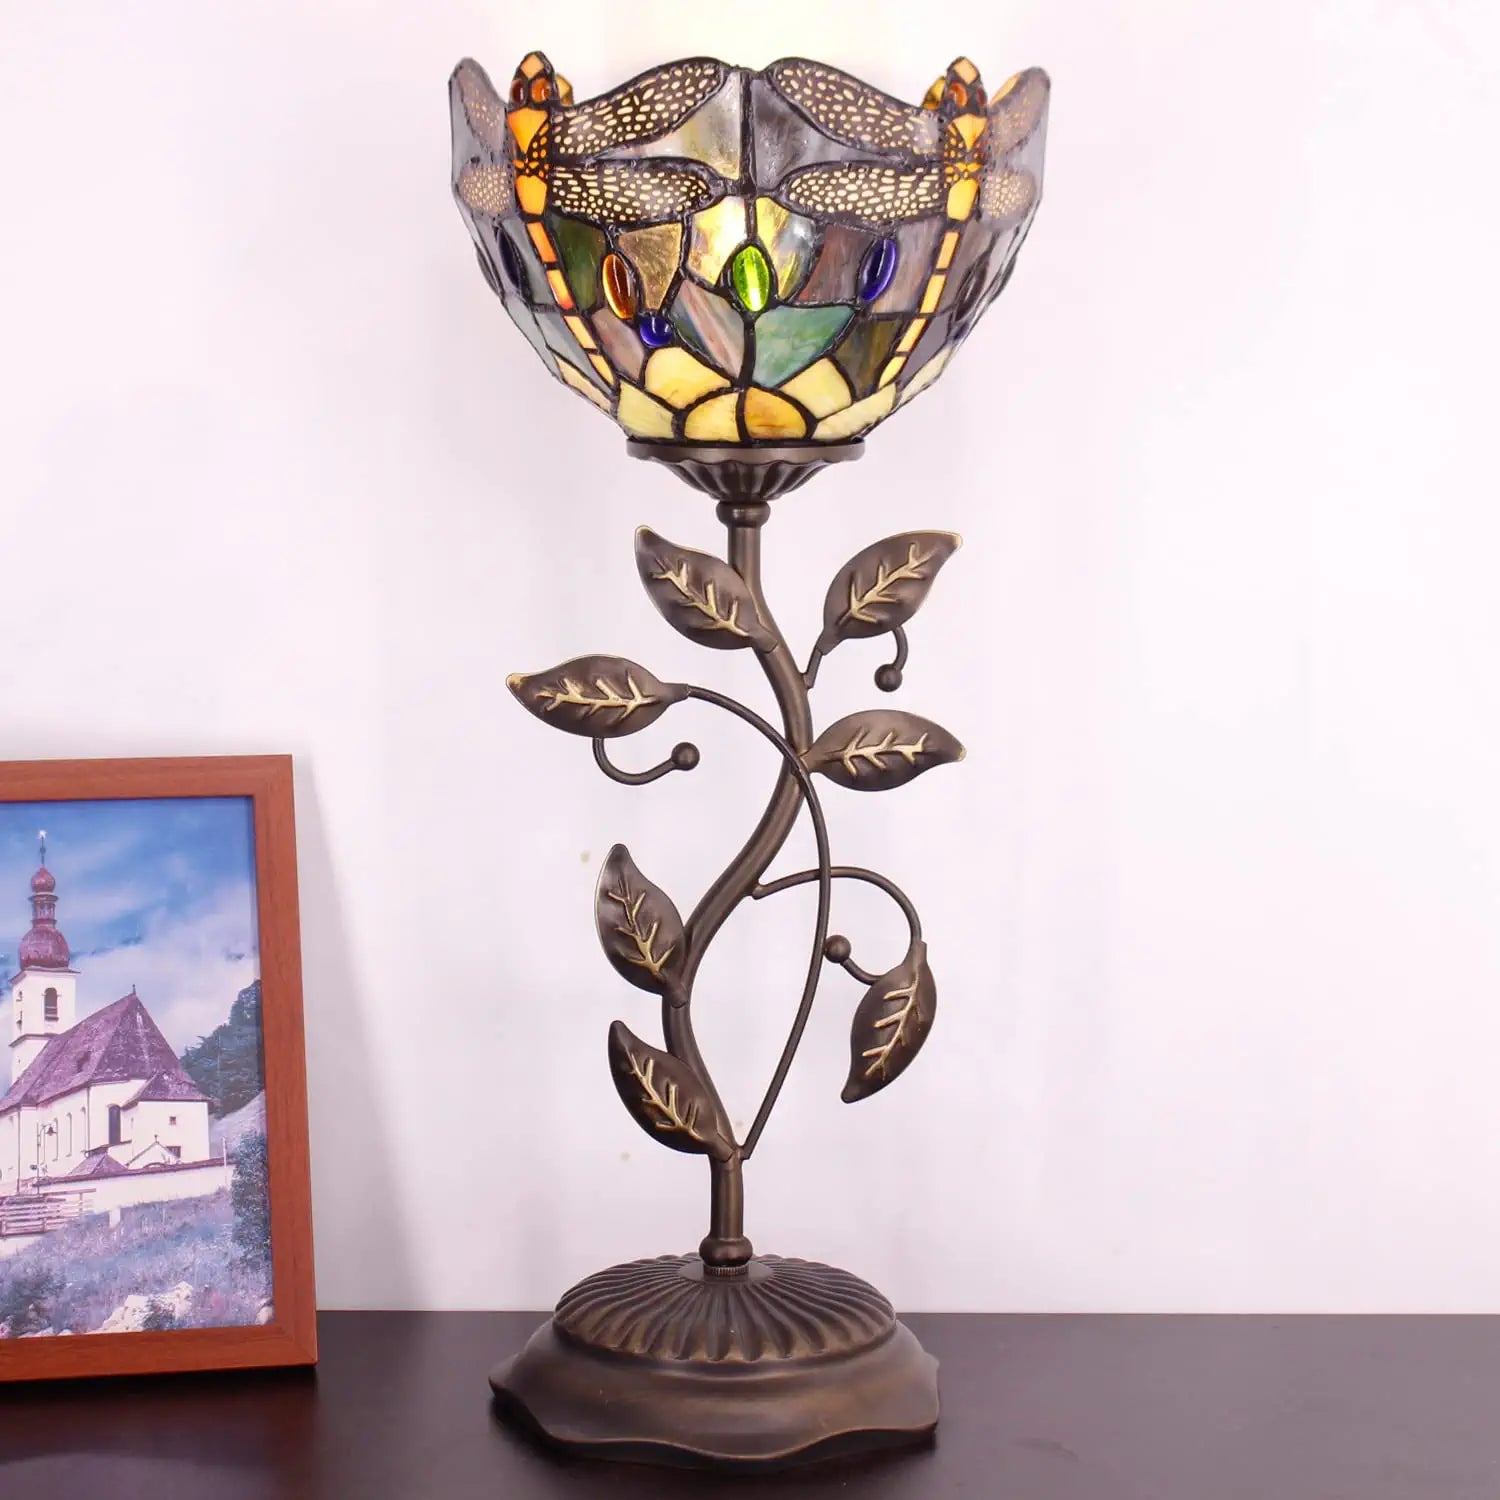 WERFACTORY Small Tiffany Table Lamp 8" Stained Glass Dragonfly Style Shade 19" Tall Antique Vintage Metal Leaf Base Mini Bedside Accent Desk Torchiere Uplight